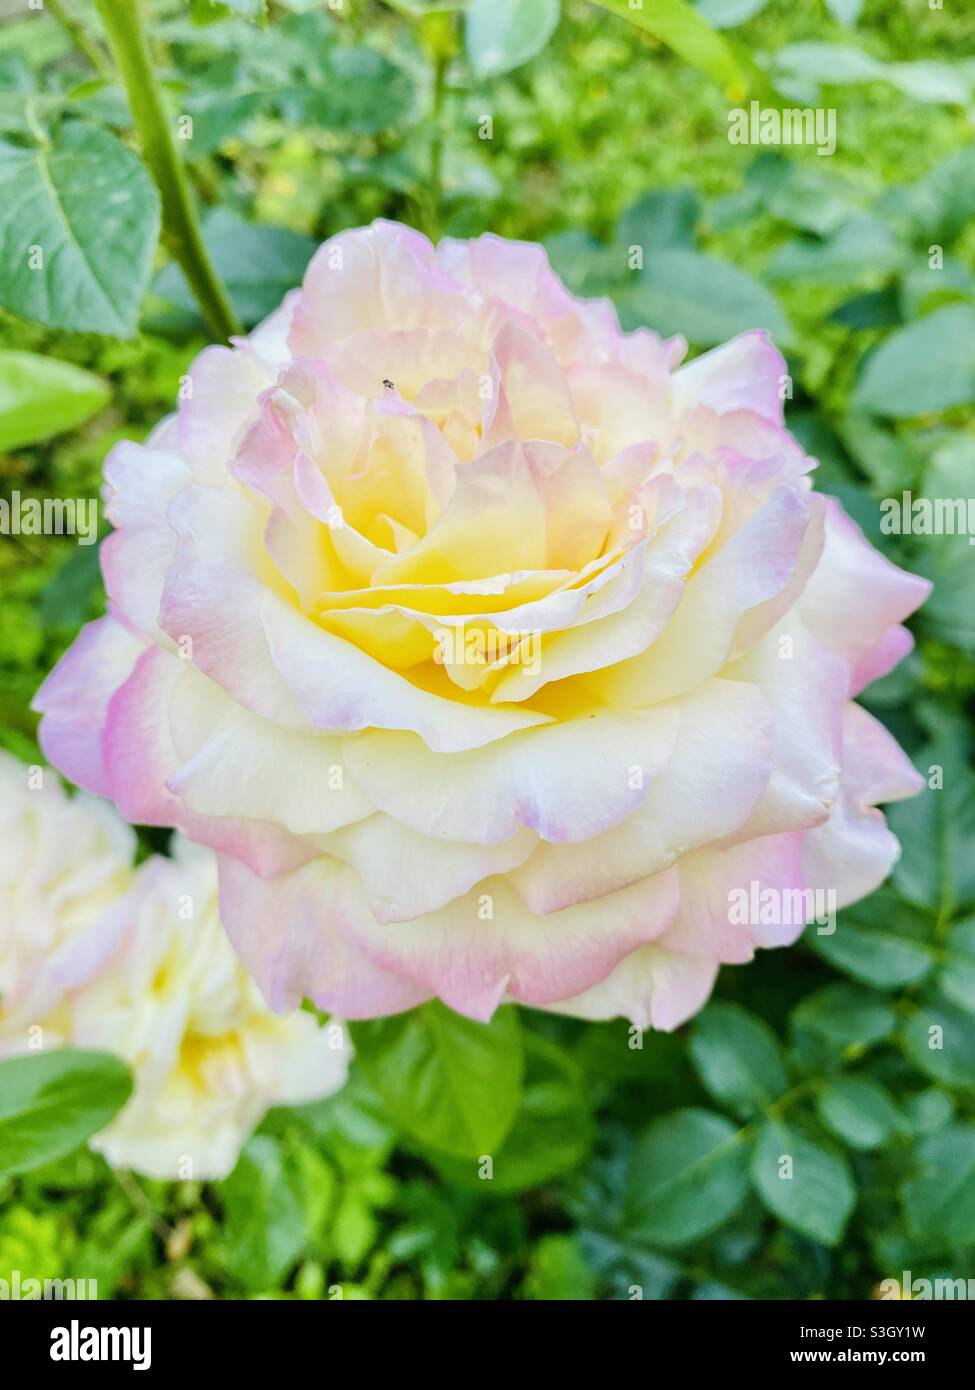 White rose petal in bloom garden nature photography beauty Stock Photo